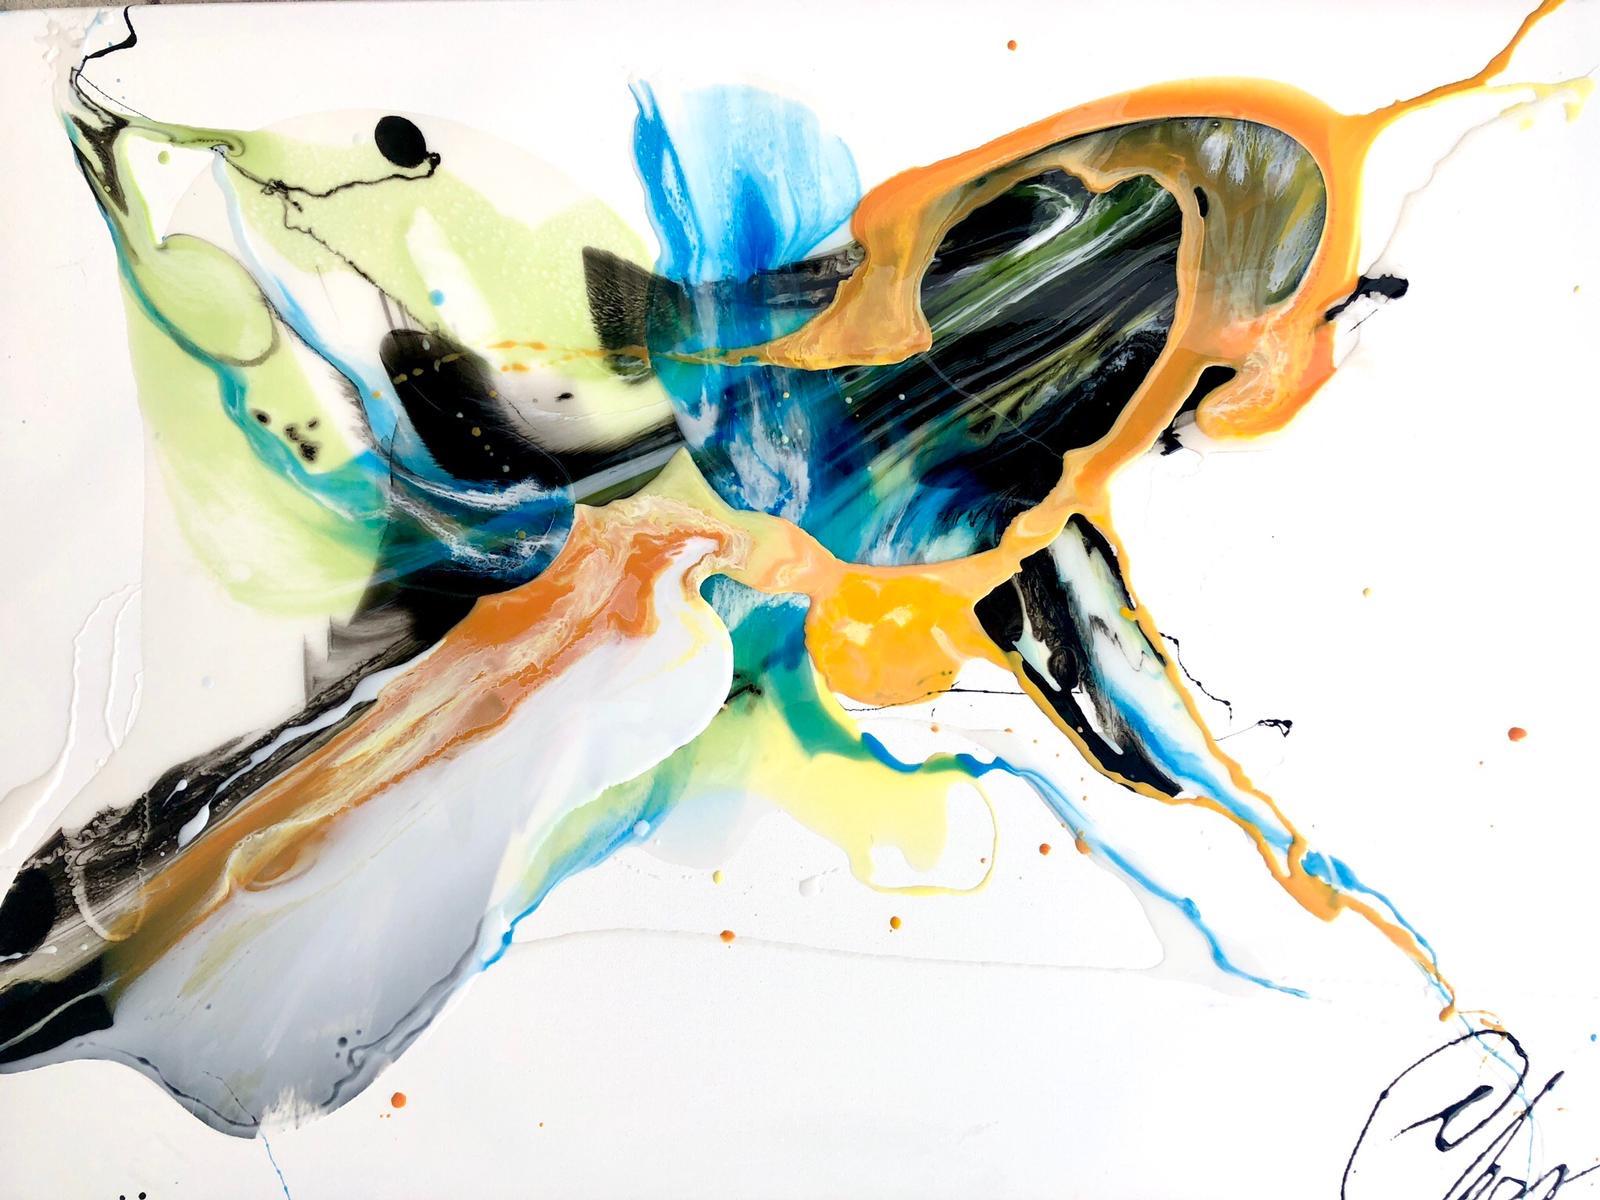 Blue Flows #2 - abstract painting in light blue, yellow, orange, black and white - Art by Lena Cher